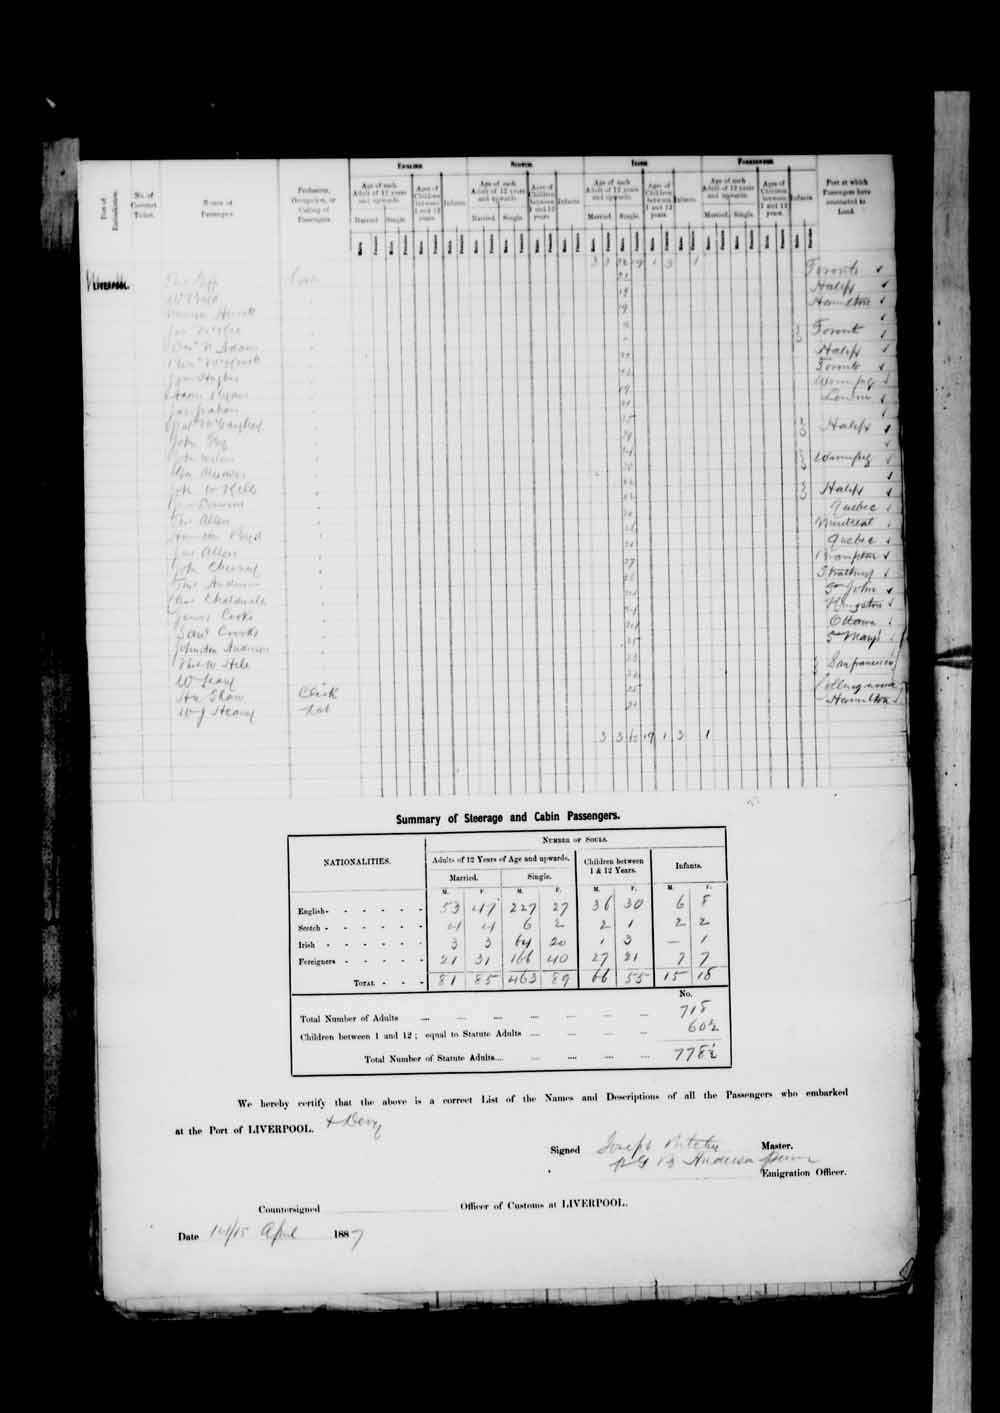 Digitized page of Passenger Lists for Image No.: e003674933